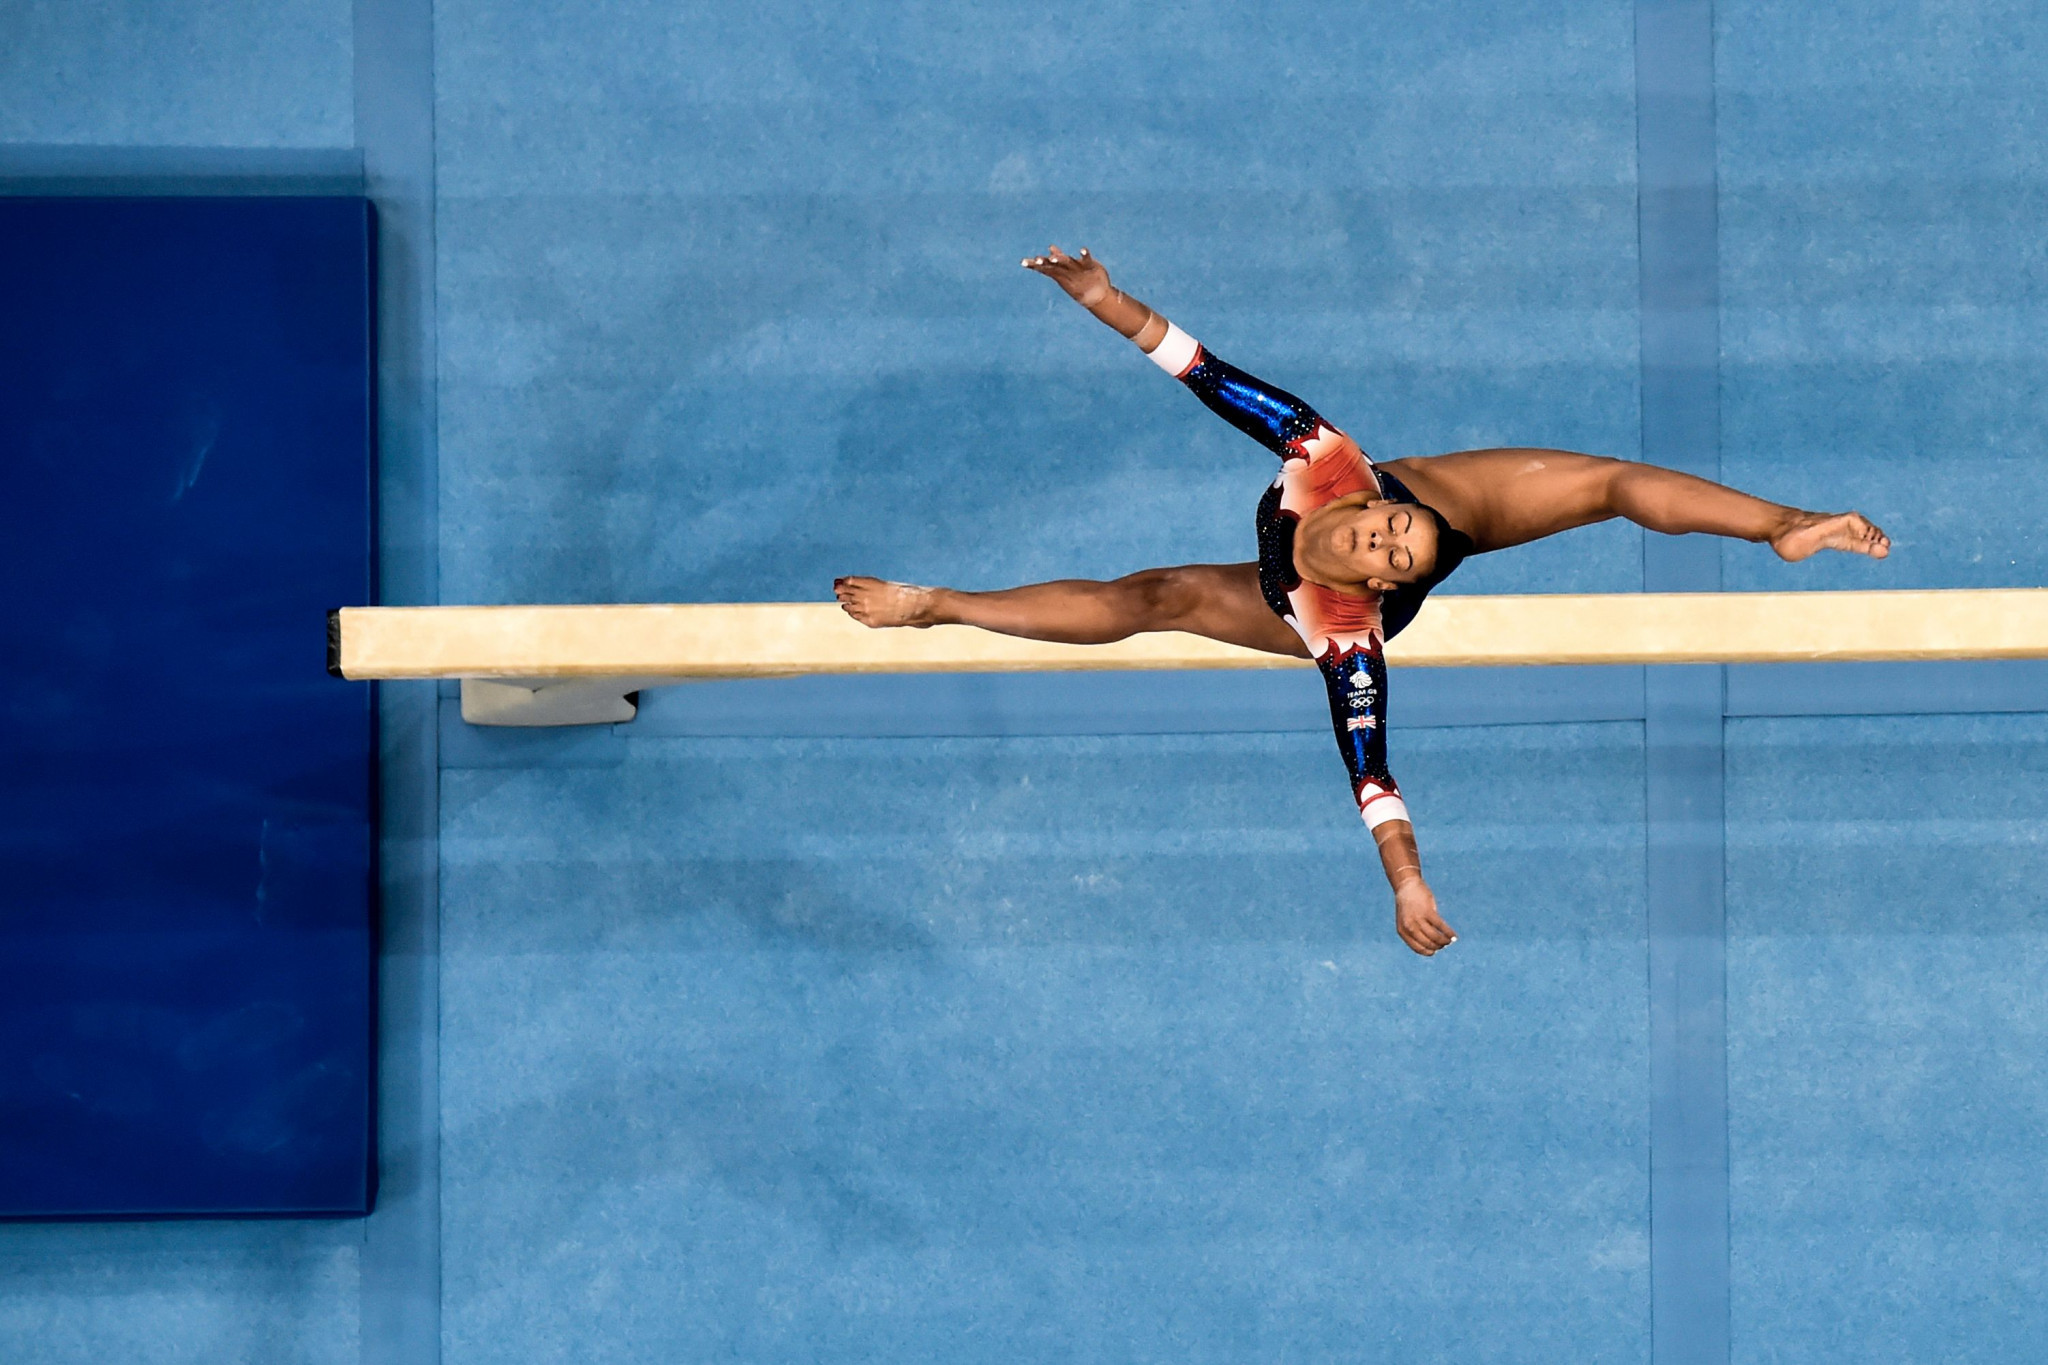 Gymnastics will be on the programme at the 2023 European Games in Poland, the EOC has announced ©Getty Images